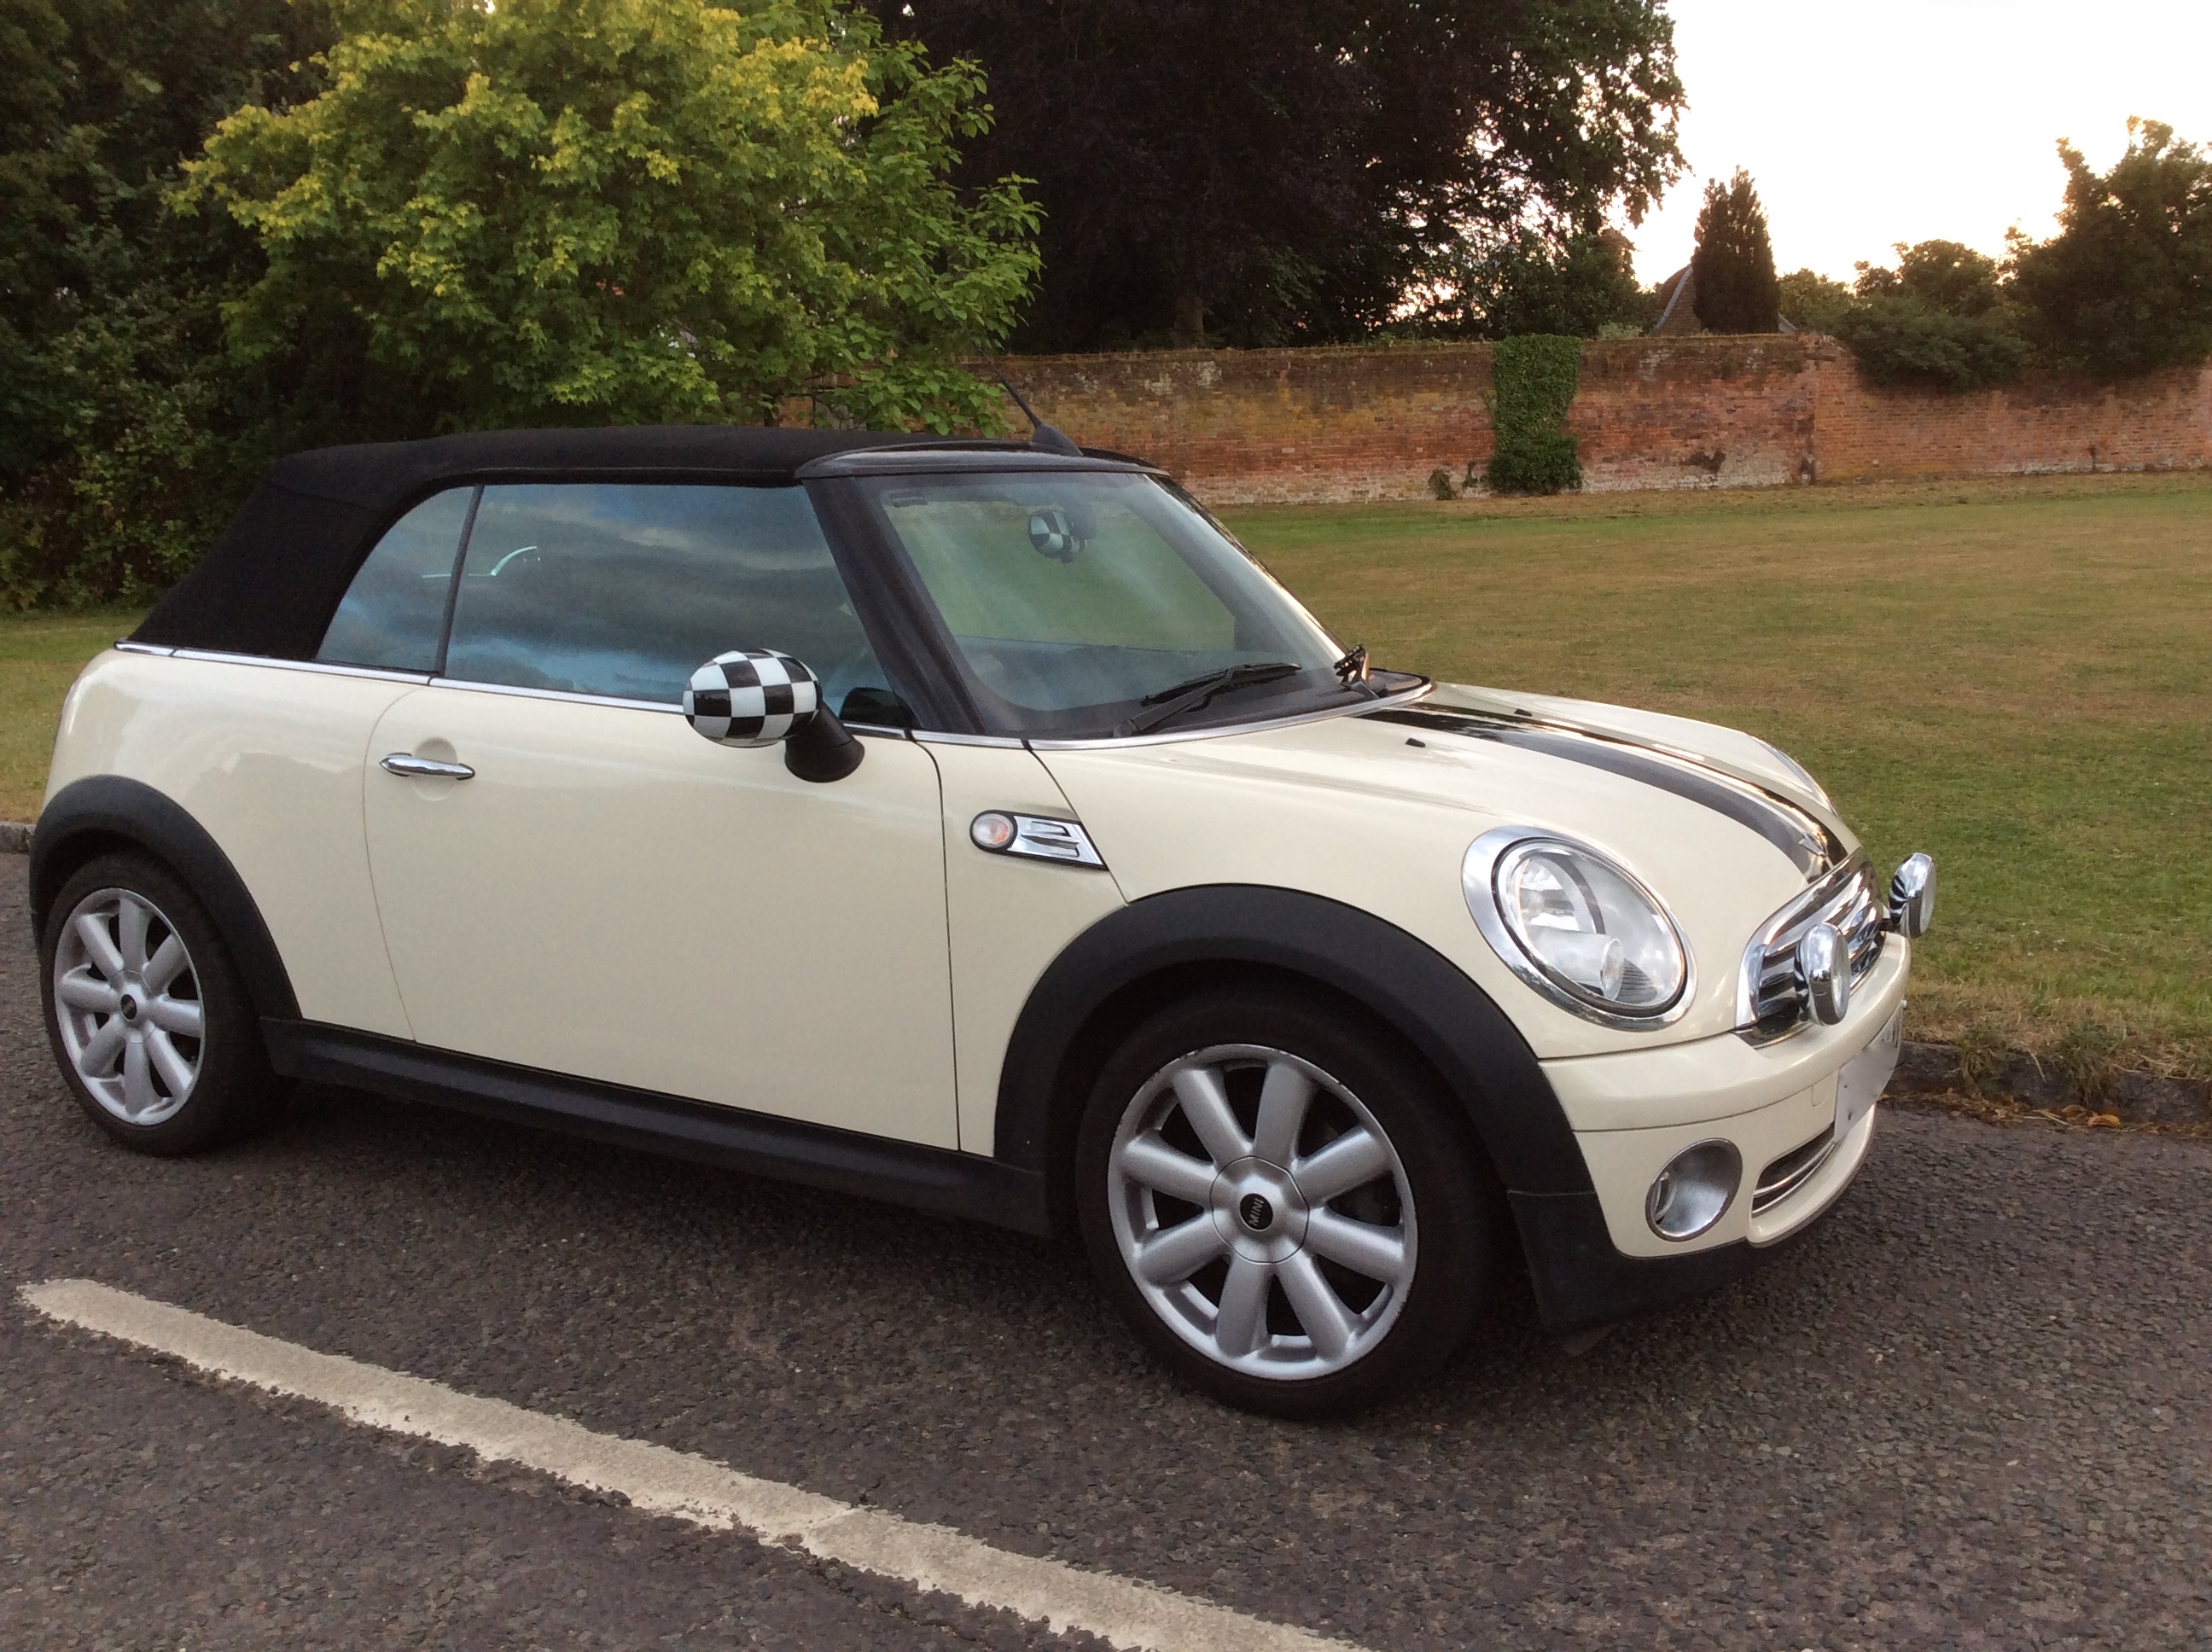 The very glamorous Irene chose this 2009 MINI Cooper Convertible in ...